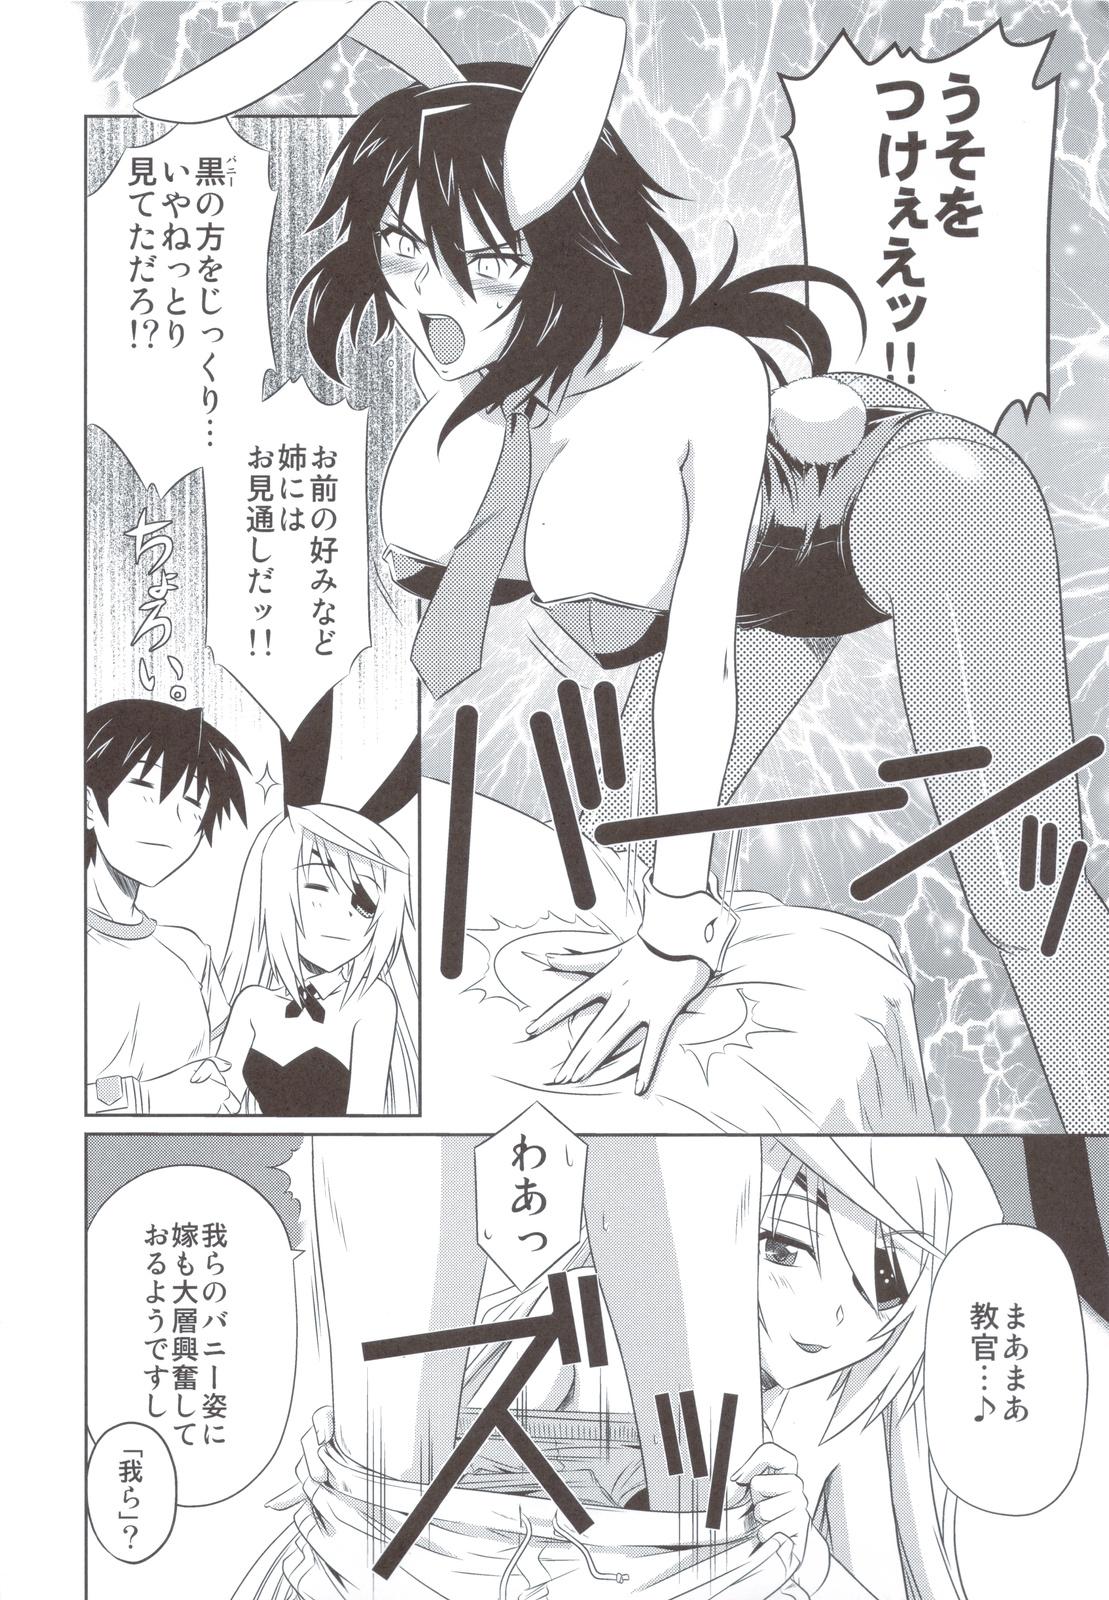 Mmf is Incest Strategy 3 - Infinite stratos Loira - Page 5